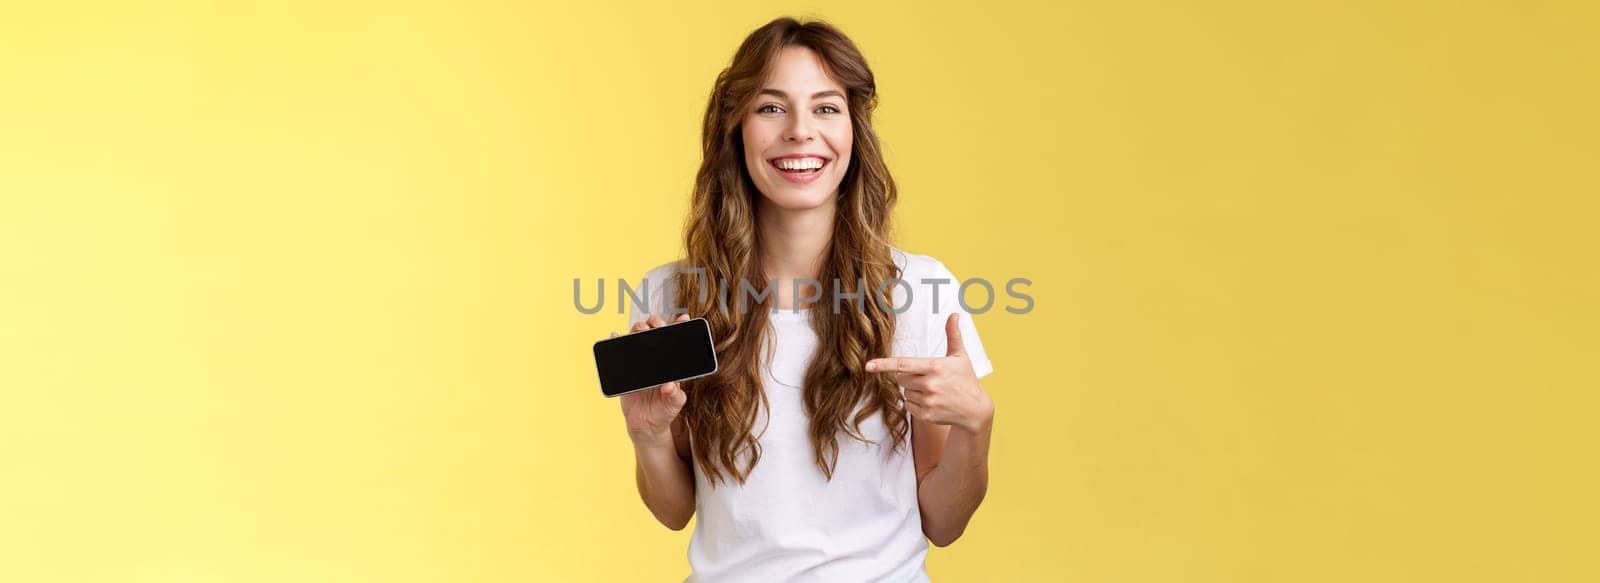 Carefree charismatic cute curly-haired female gamer likes playing smartphone games showing own game score hold mobile phone horizontal pointing display laughing pleased amused. Copy space